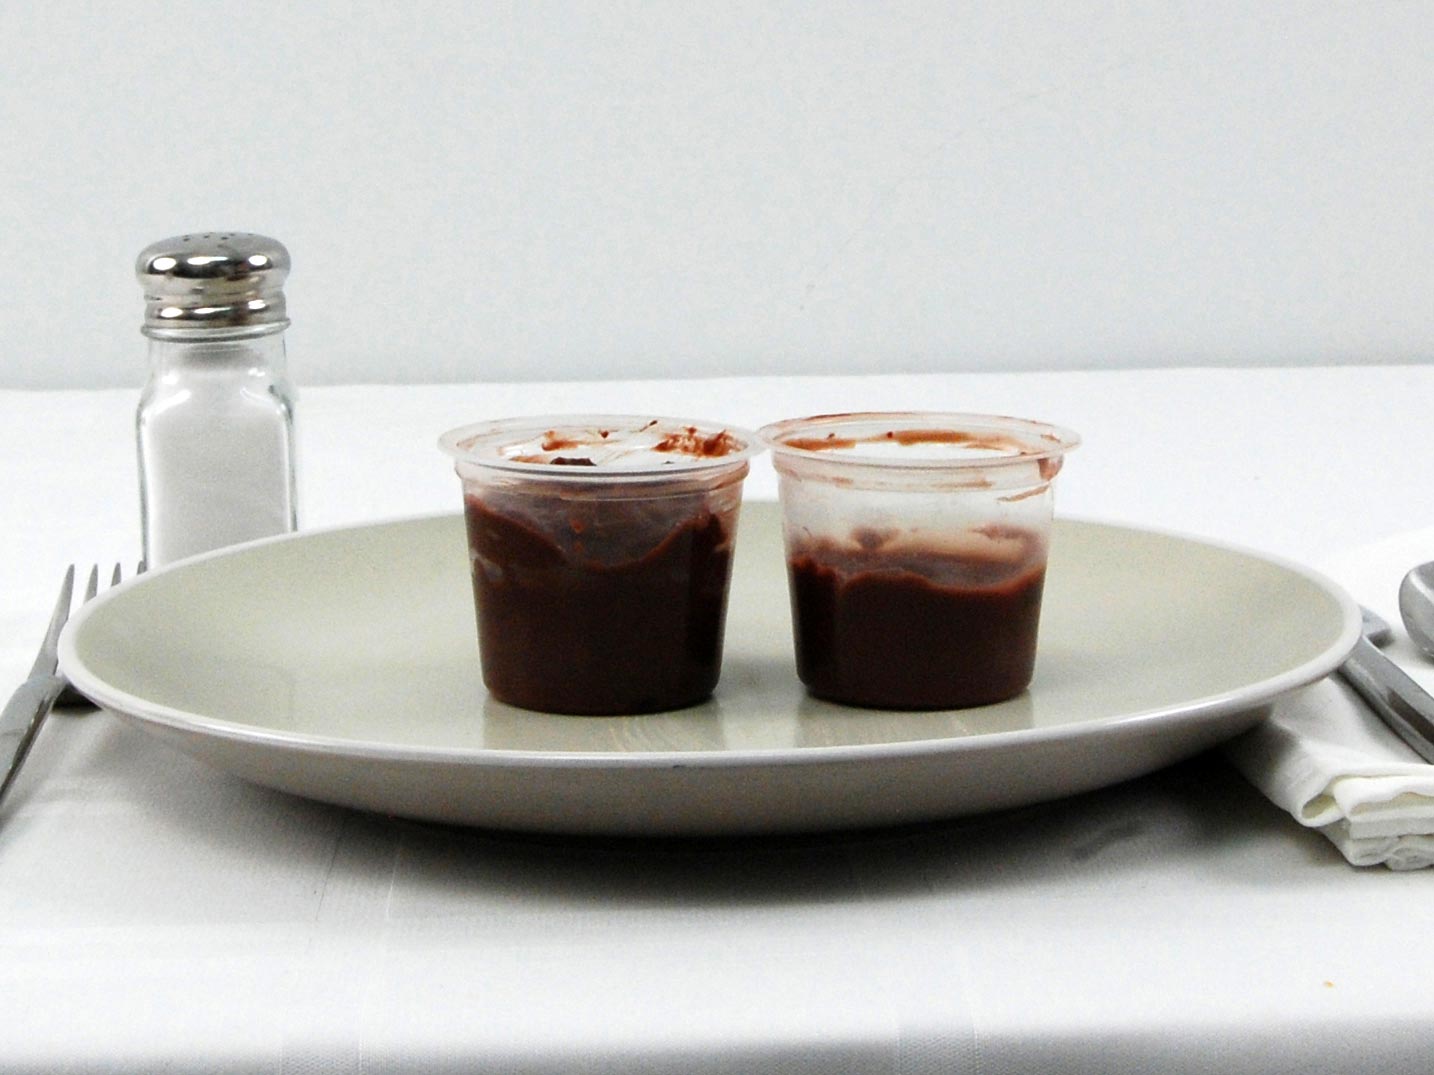 Calories in 1.5 container(s) of Sugar Free Chocolate Pudding Snacks